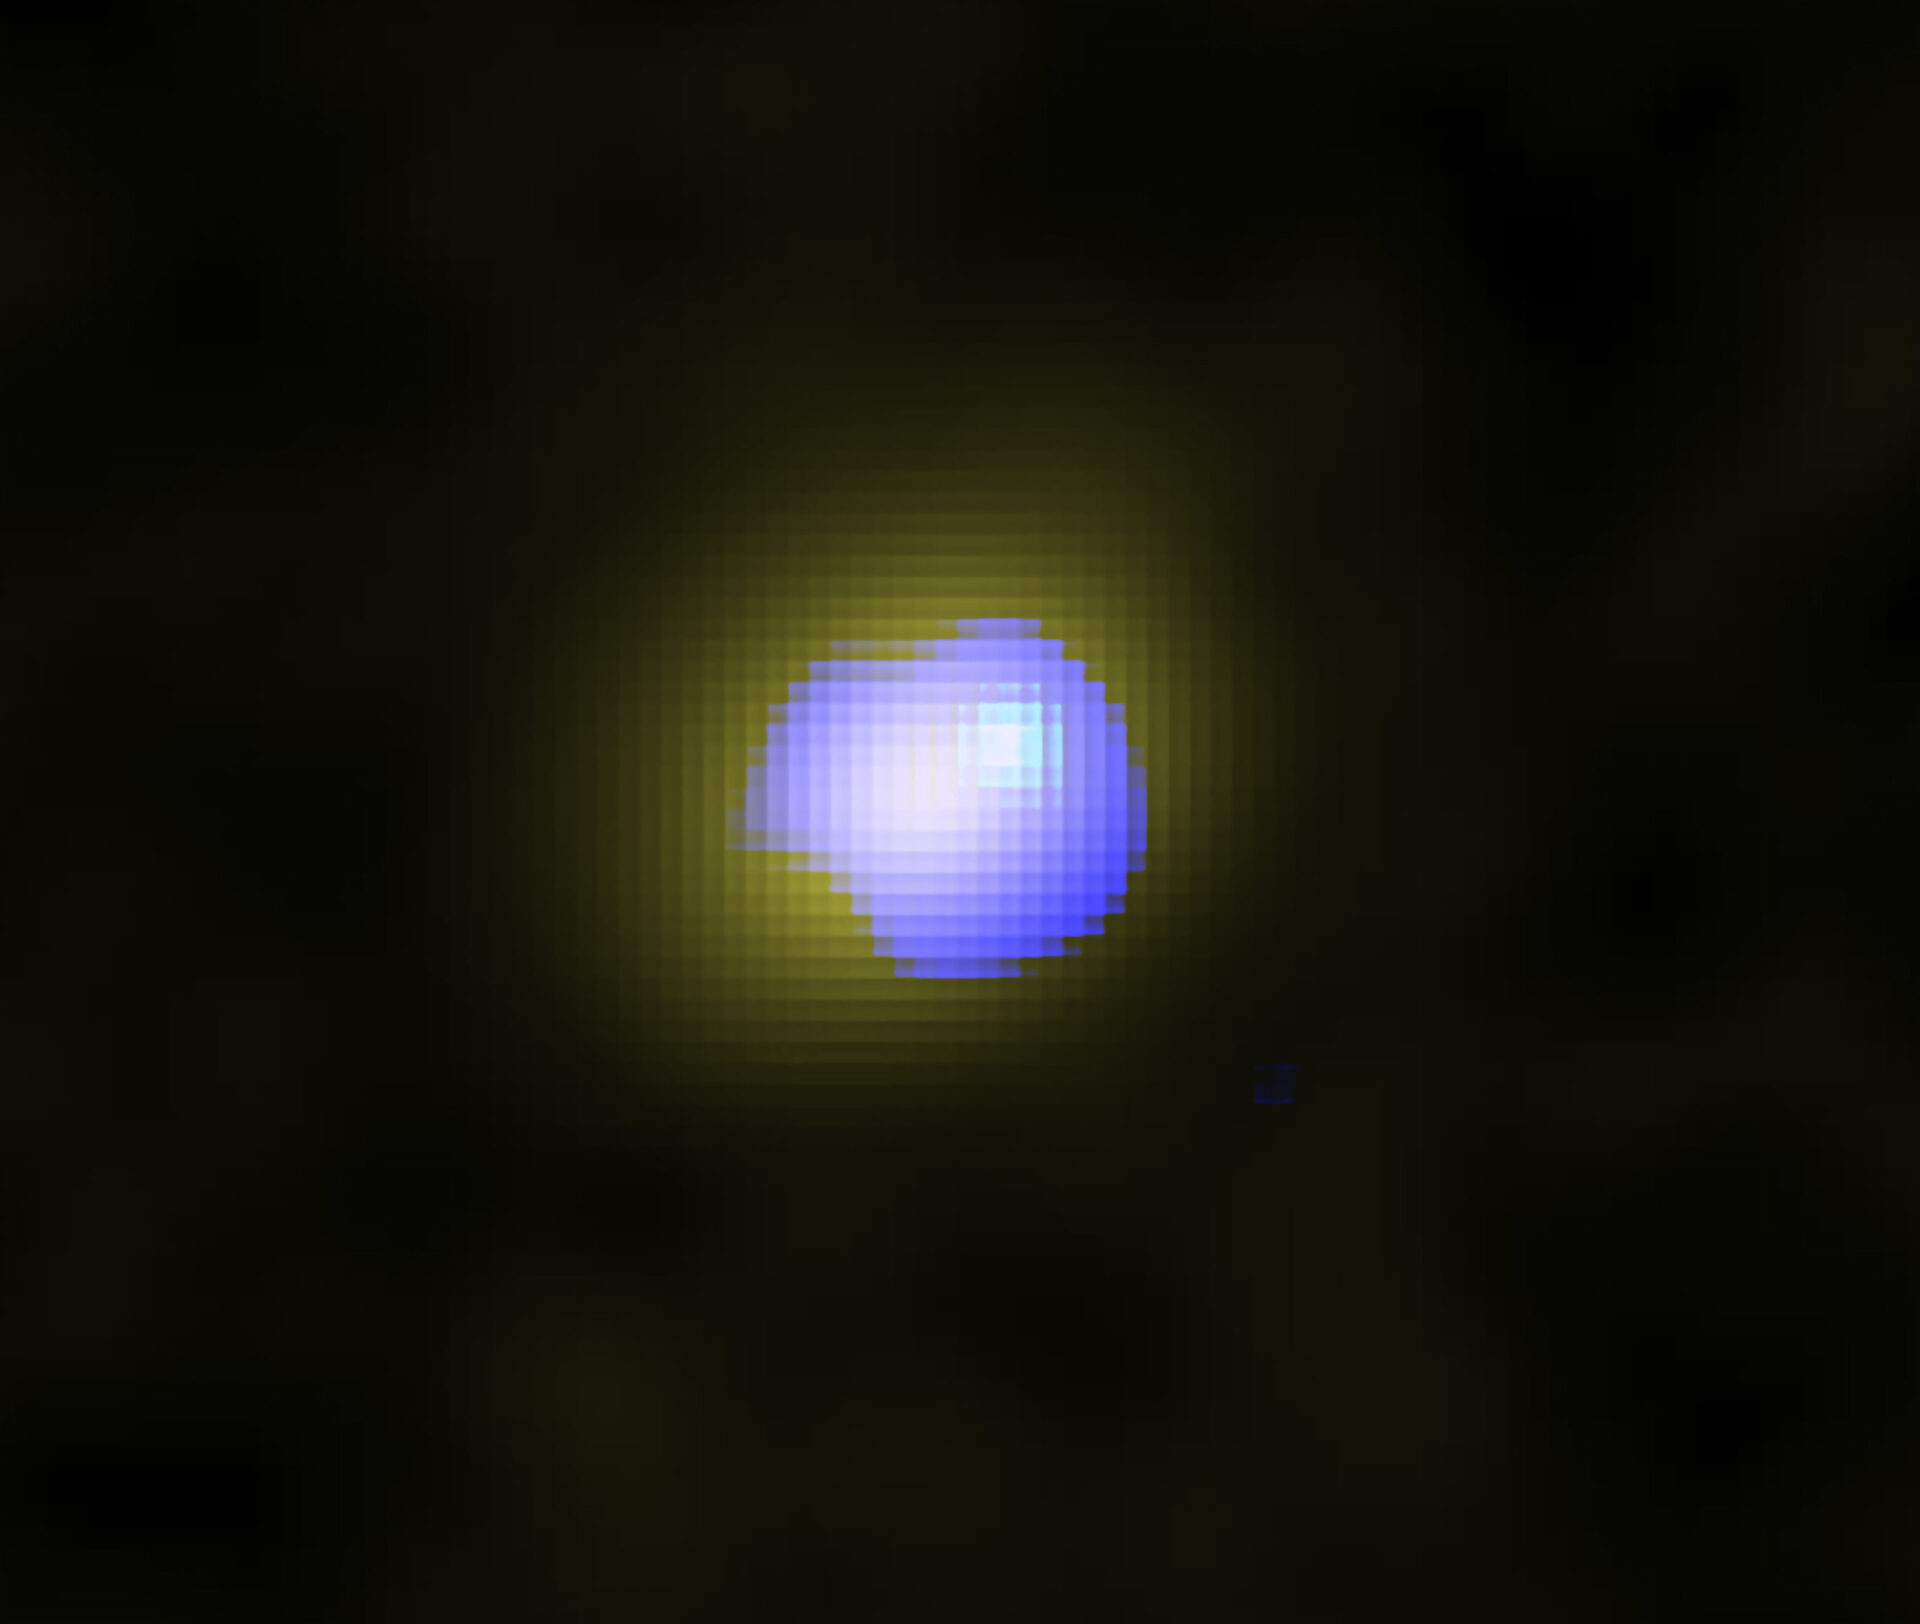 ALMA image of the distant galaxy J1243+0100 hosting a supermassive black hole in its center. The distribution of the quiet gas in the galaxy is shown in yellow, and the distribution of high-speed galactic wind is shown in blue. The wind is located in the galaxy center, which indicates the supermassive black hole drives the wind. Credit: ALMA (ESO/NAOJ/NRAO), Izumi et al.